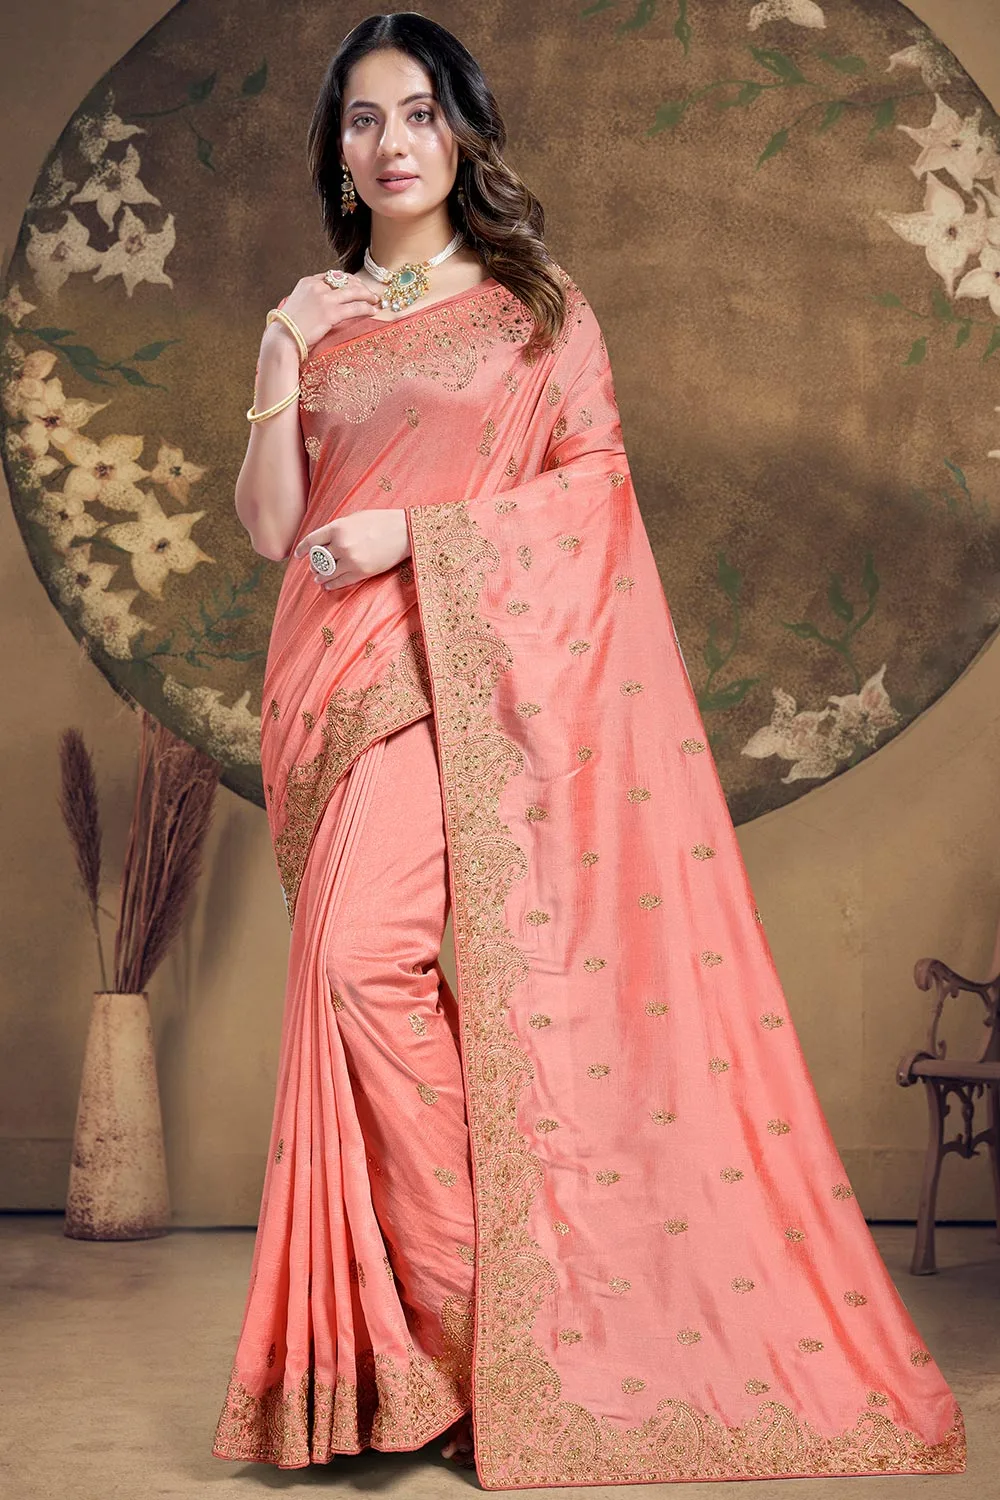 Peach Saree: Heavy Sequence Embroidered Work with Matching Blouse